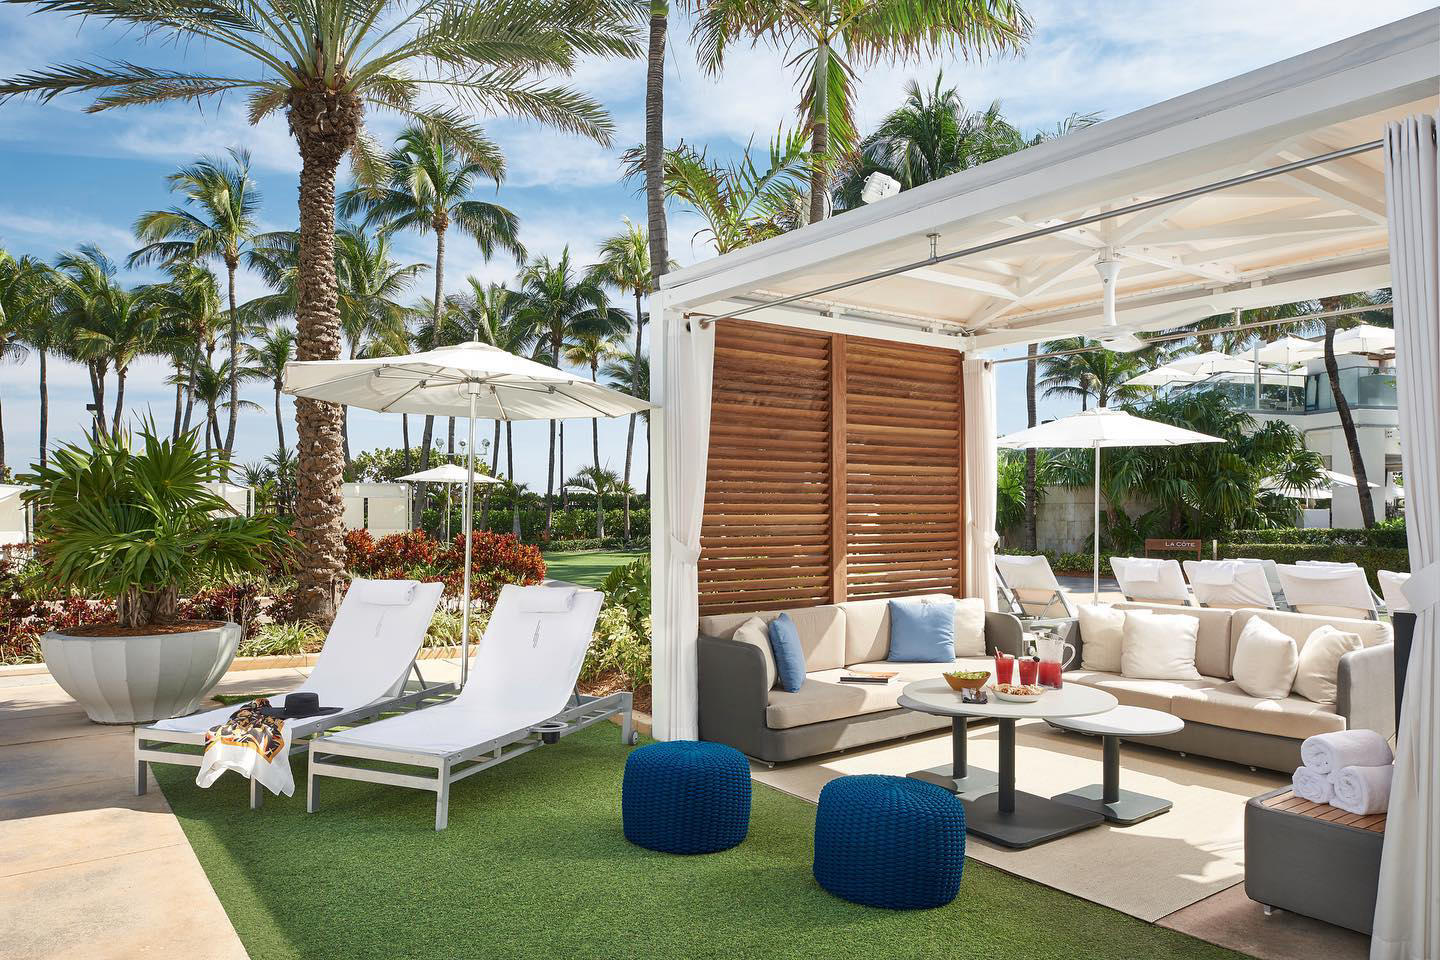 Fontainebleau is thrilled to announce cabana daypass packages to non-hotel guests, available Monday